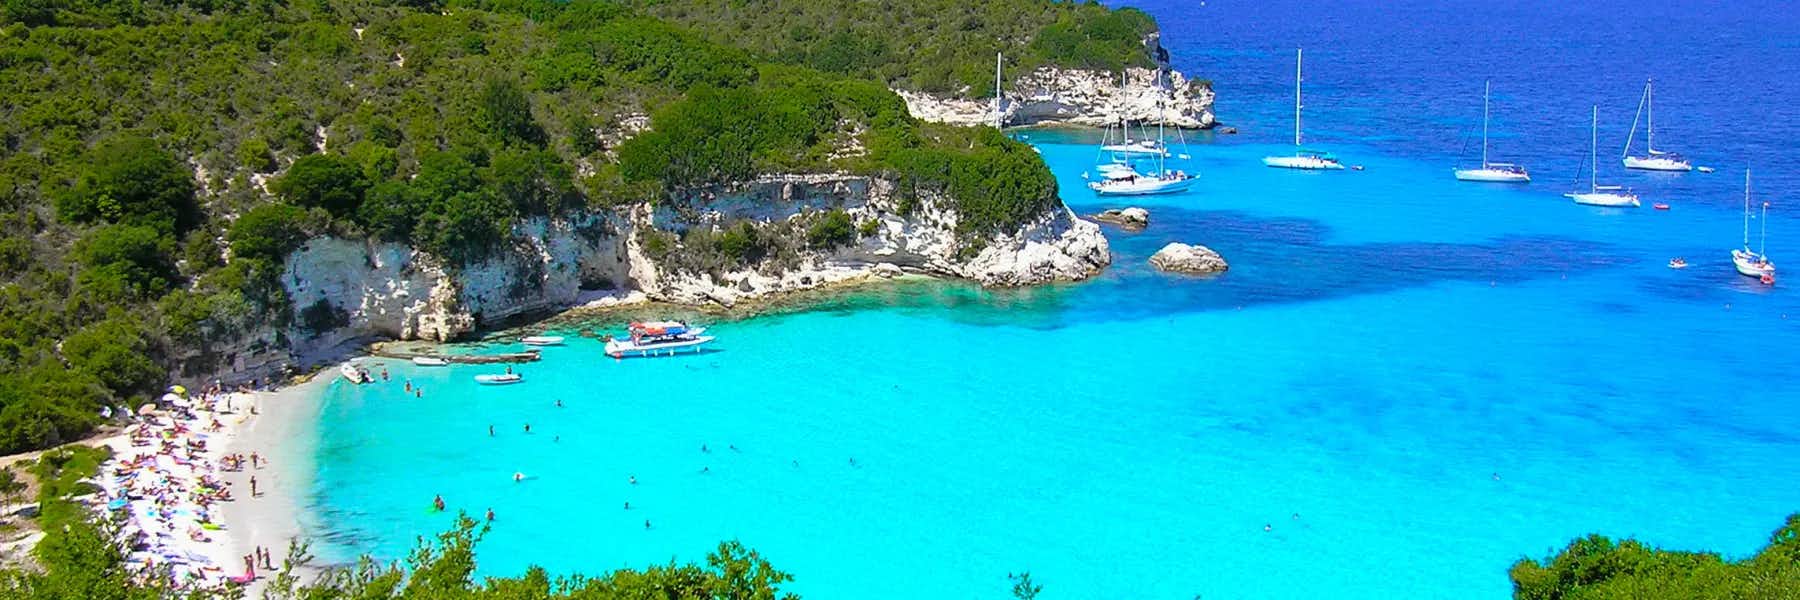 Ionian Islands Travel Guide